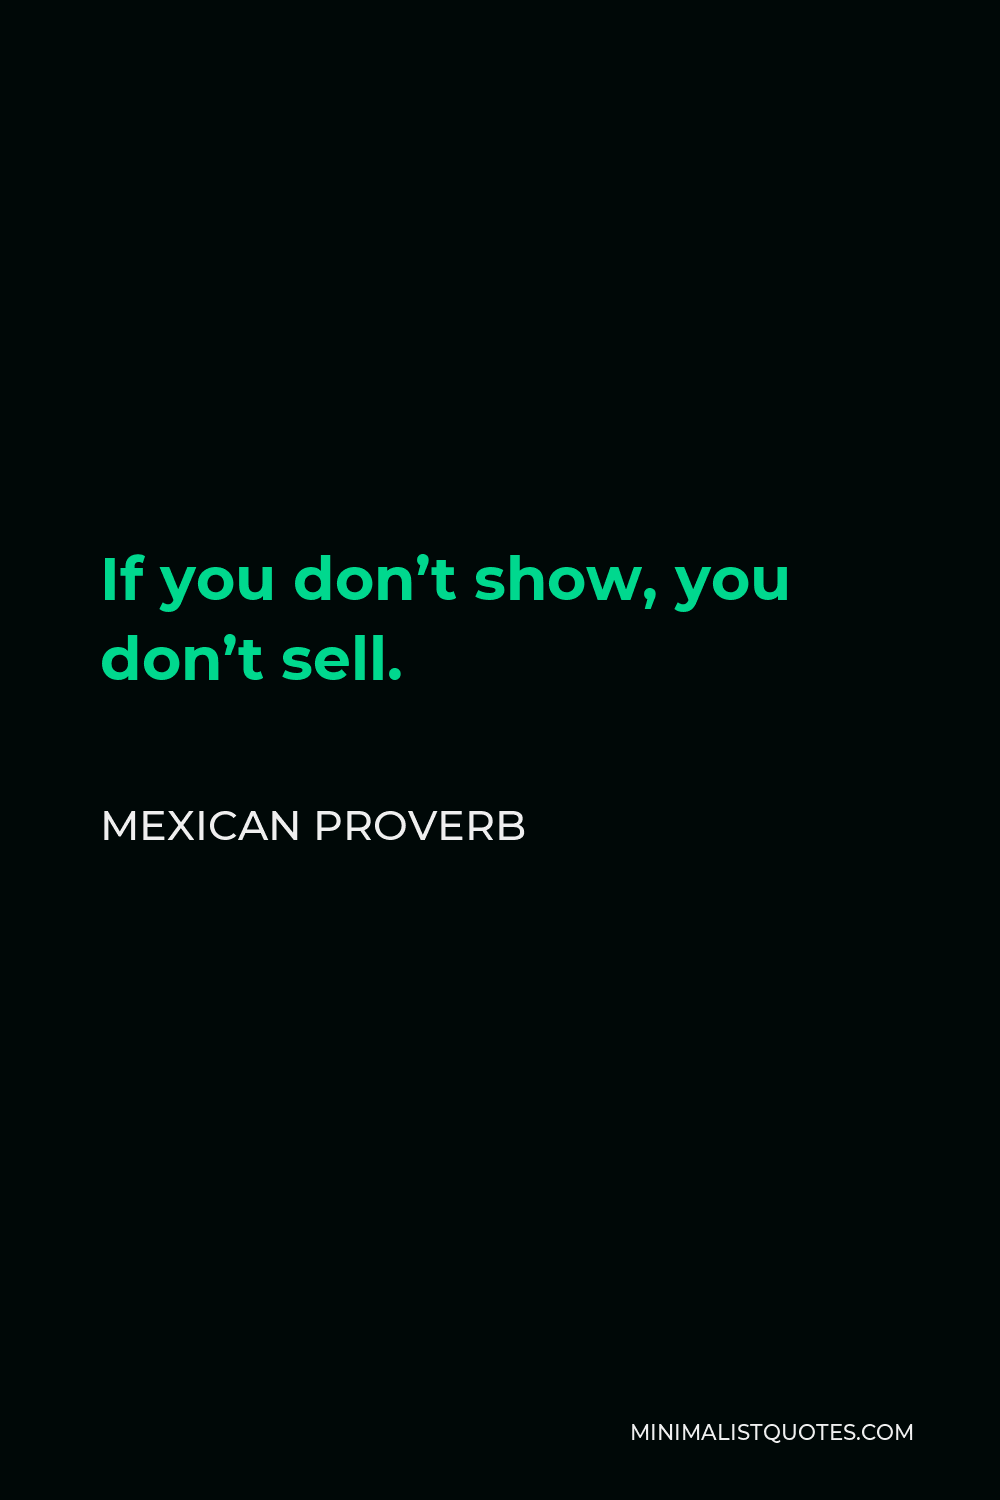 Mexican Proverb Quote - If you don’t show, you don’t sell.